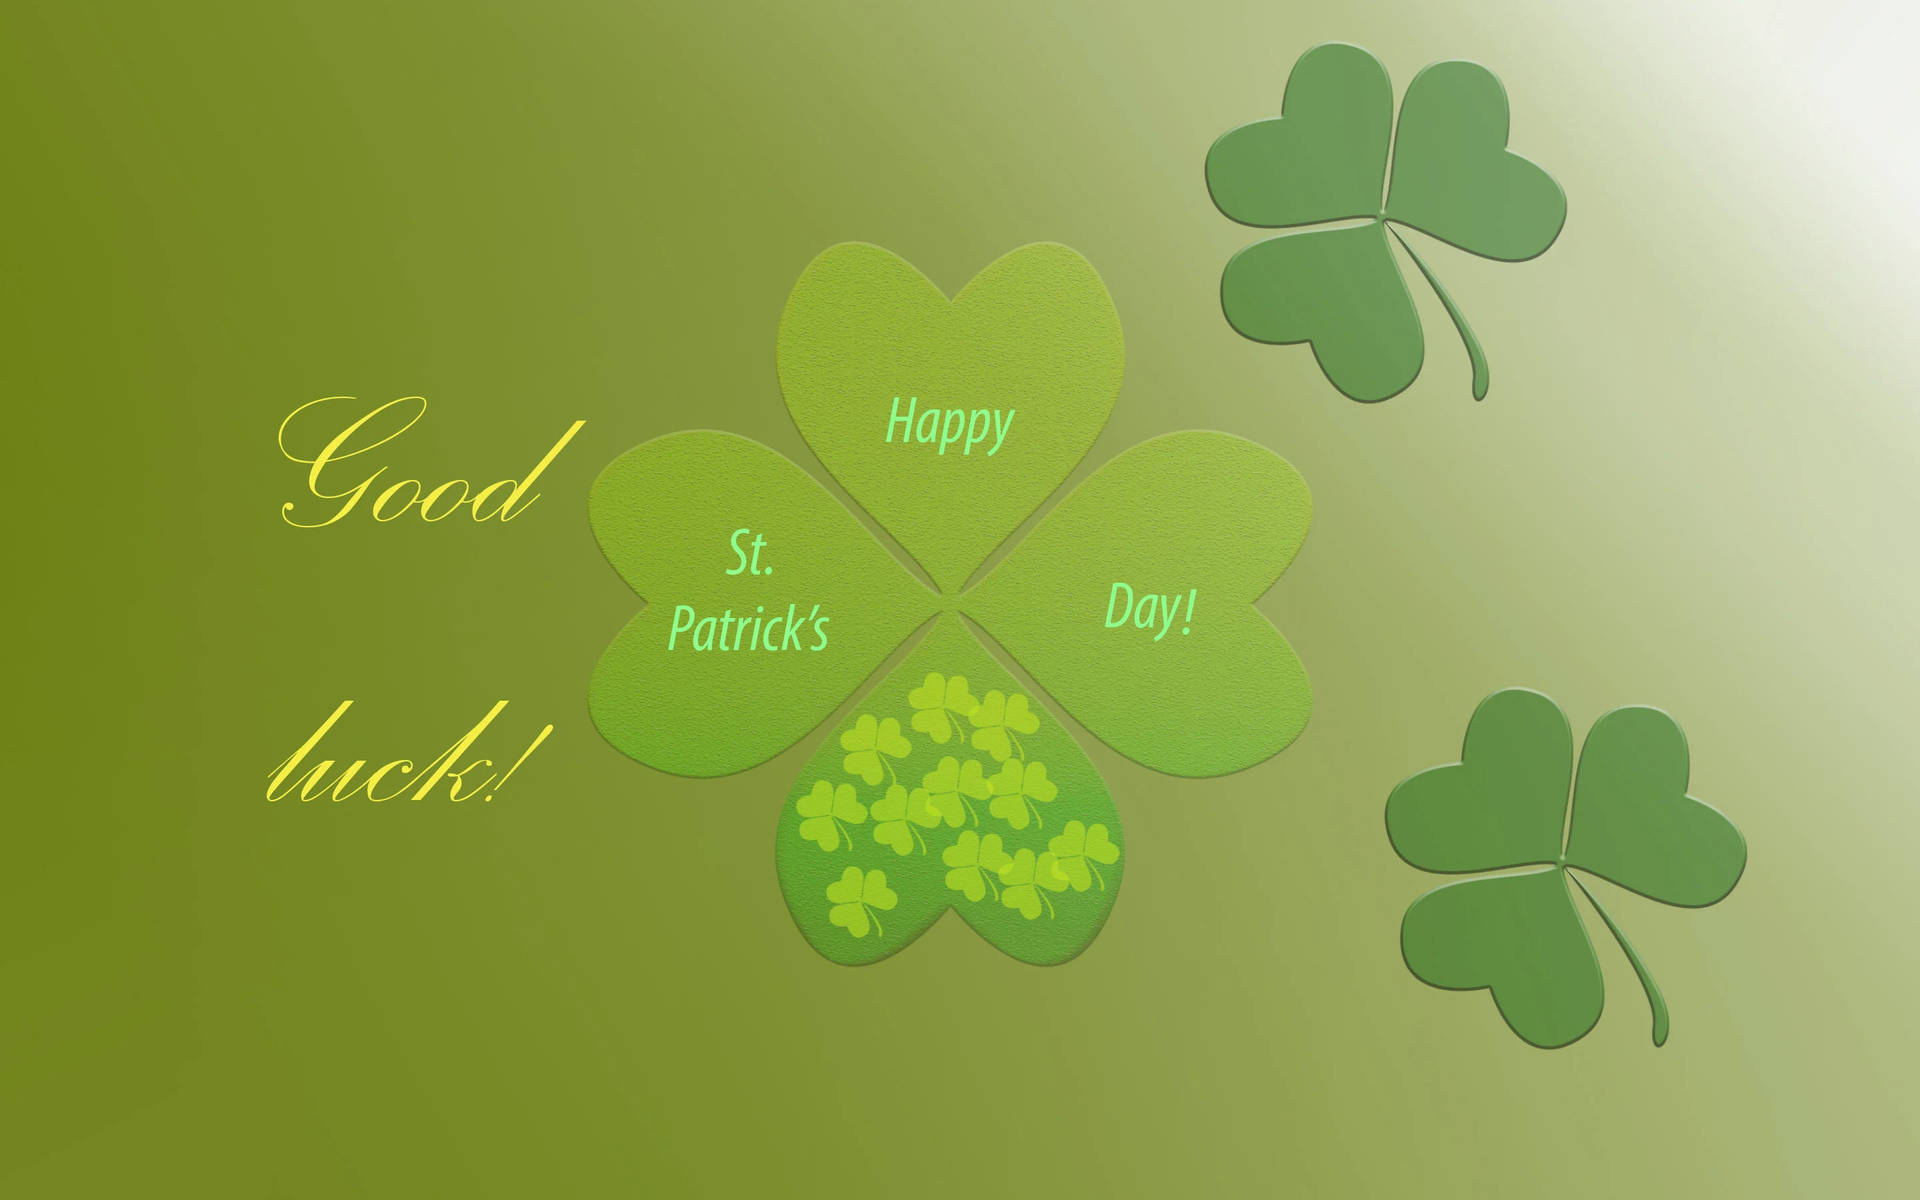 Saint Patrick’s Day With A Clover Design Background